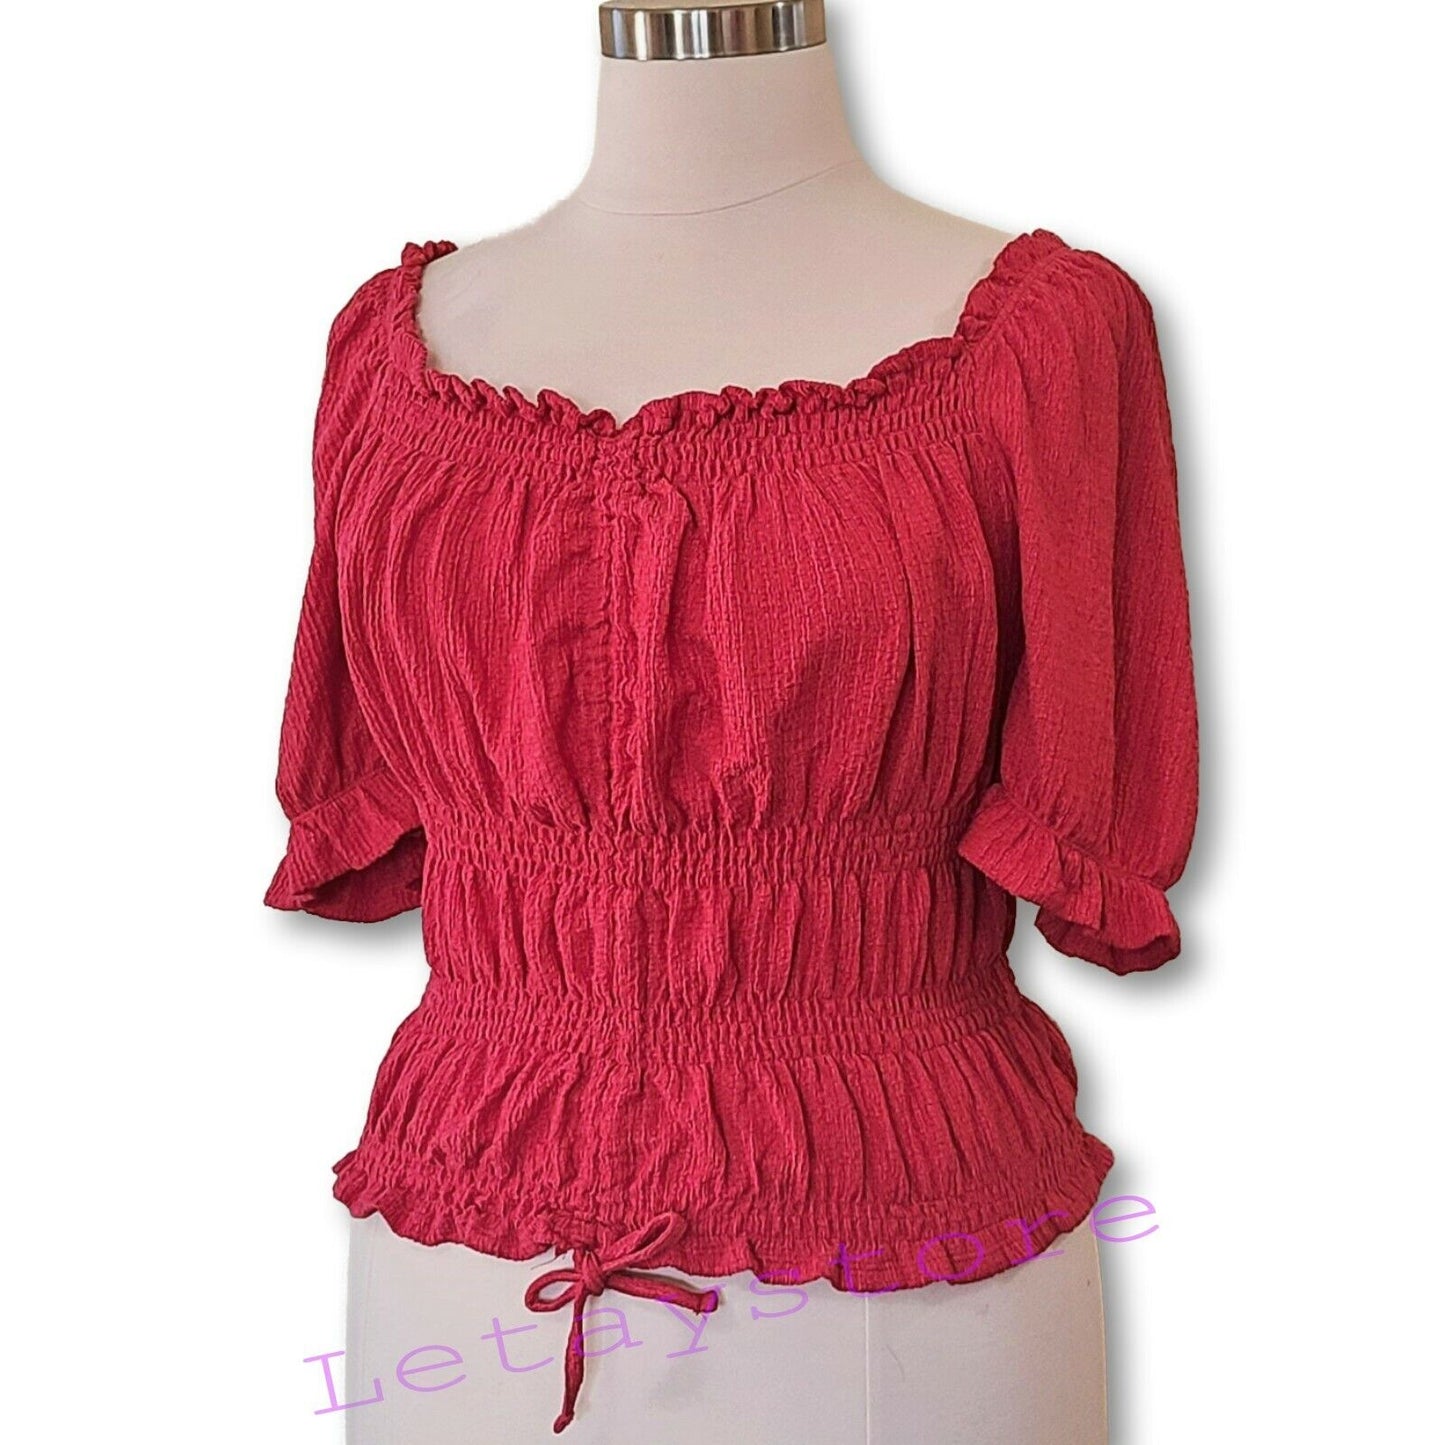 Anthropologie Pilcro Ruffle Puff-Sleeved Cinched Waist Blouse Top